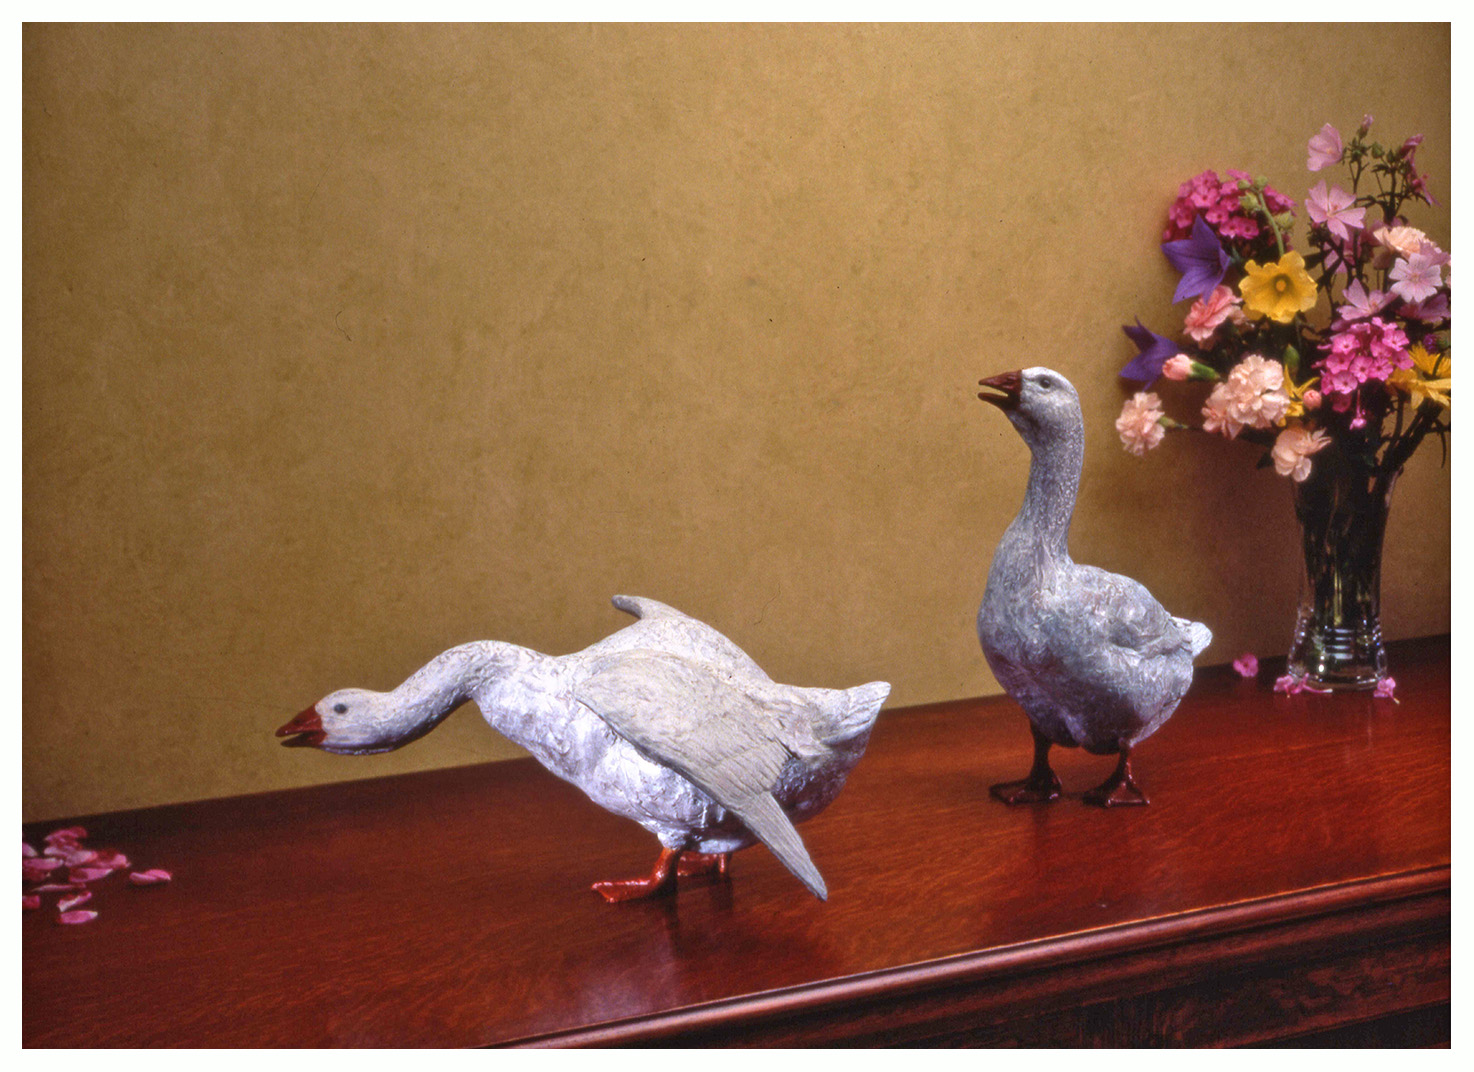 Realistic bronze sculpture of two table size geese, both honking one alert with its head up and wings folded the other aggressive with wings spread and neck extended